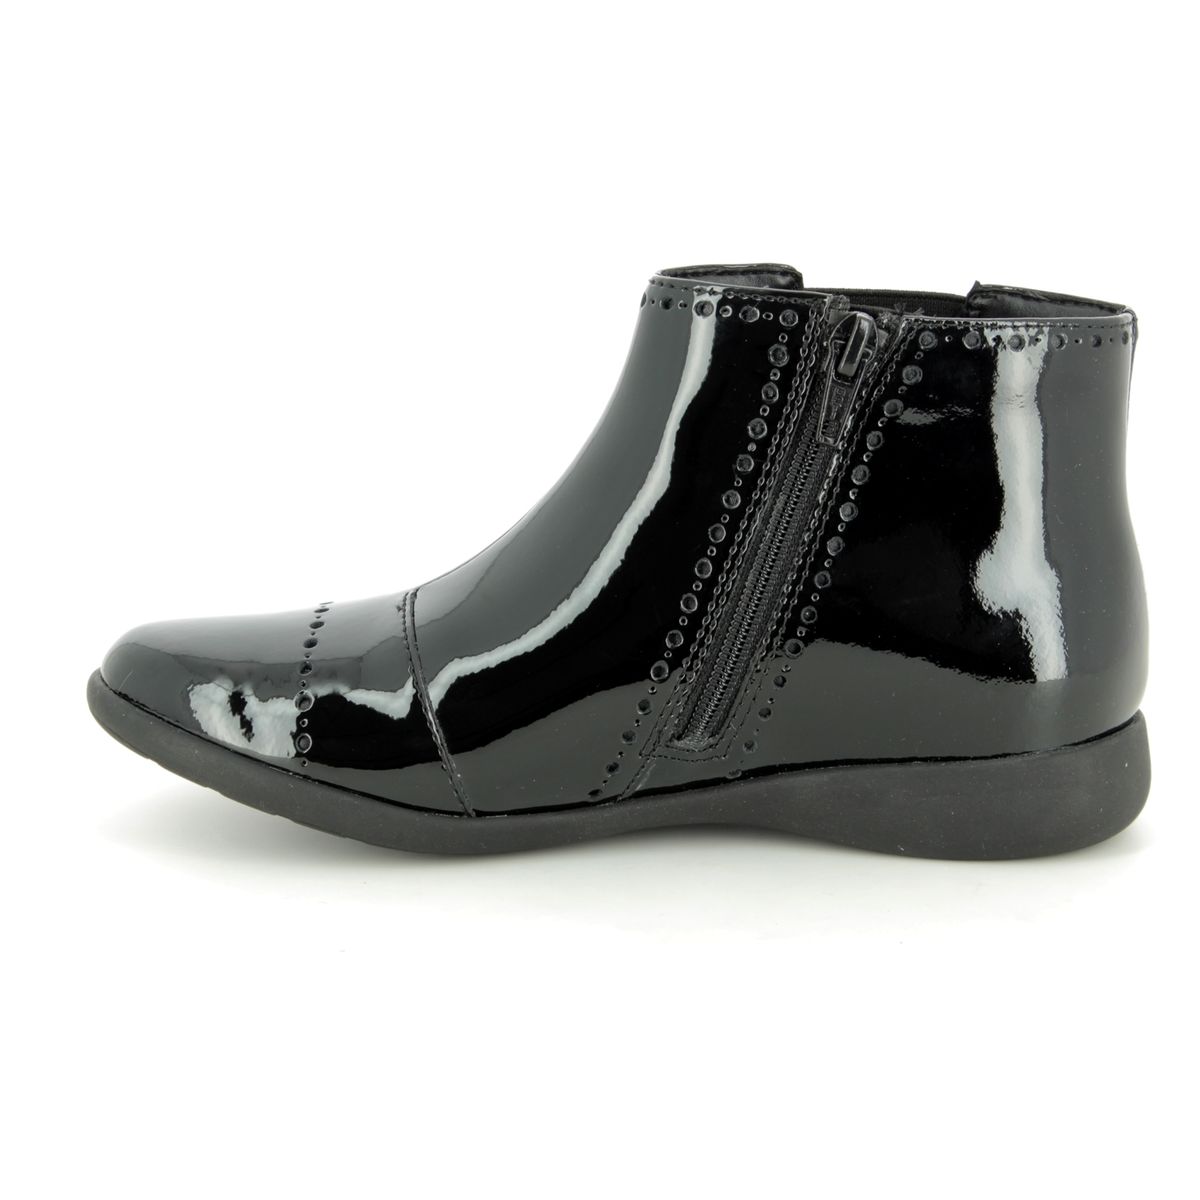 k by clarks patent boots